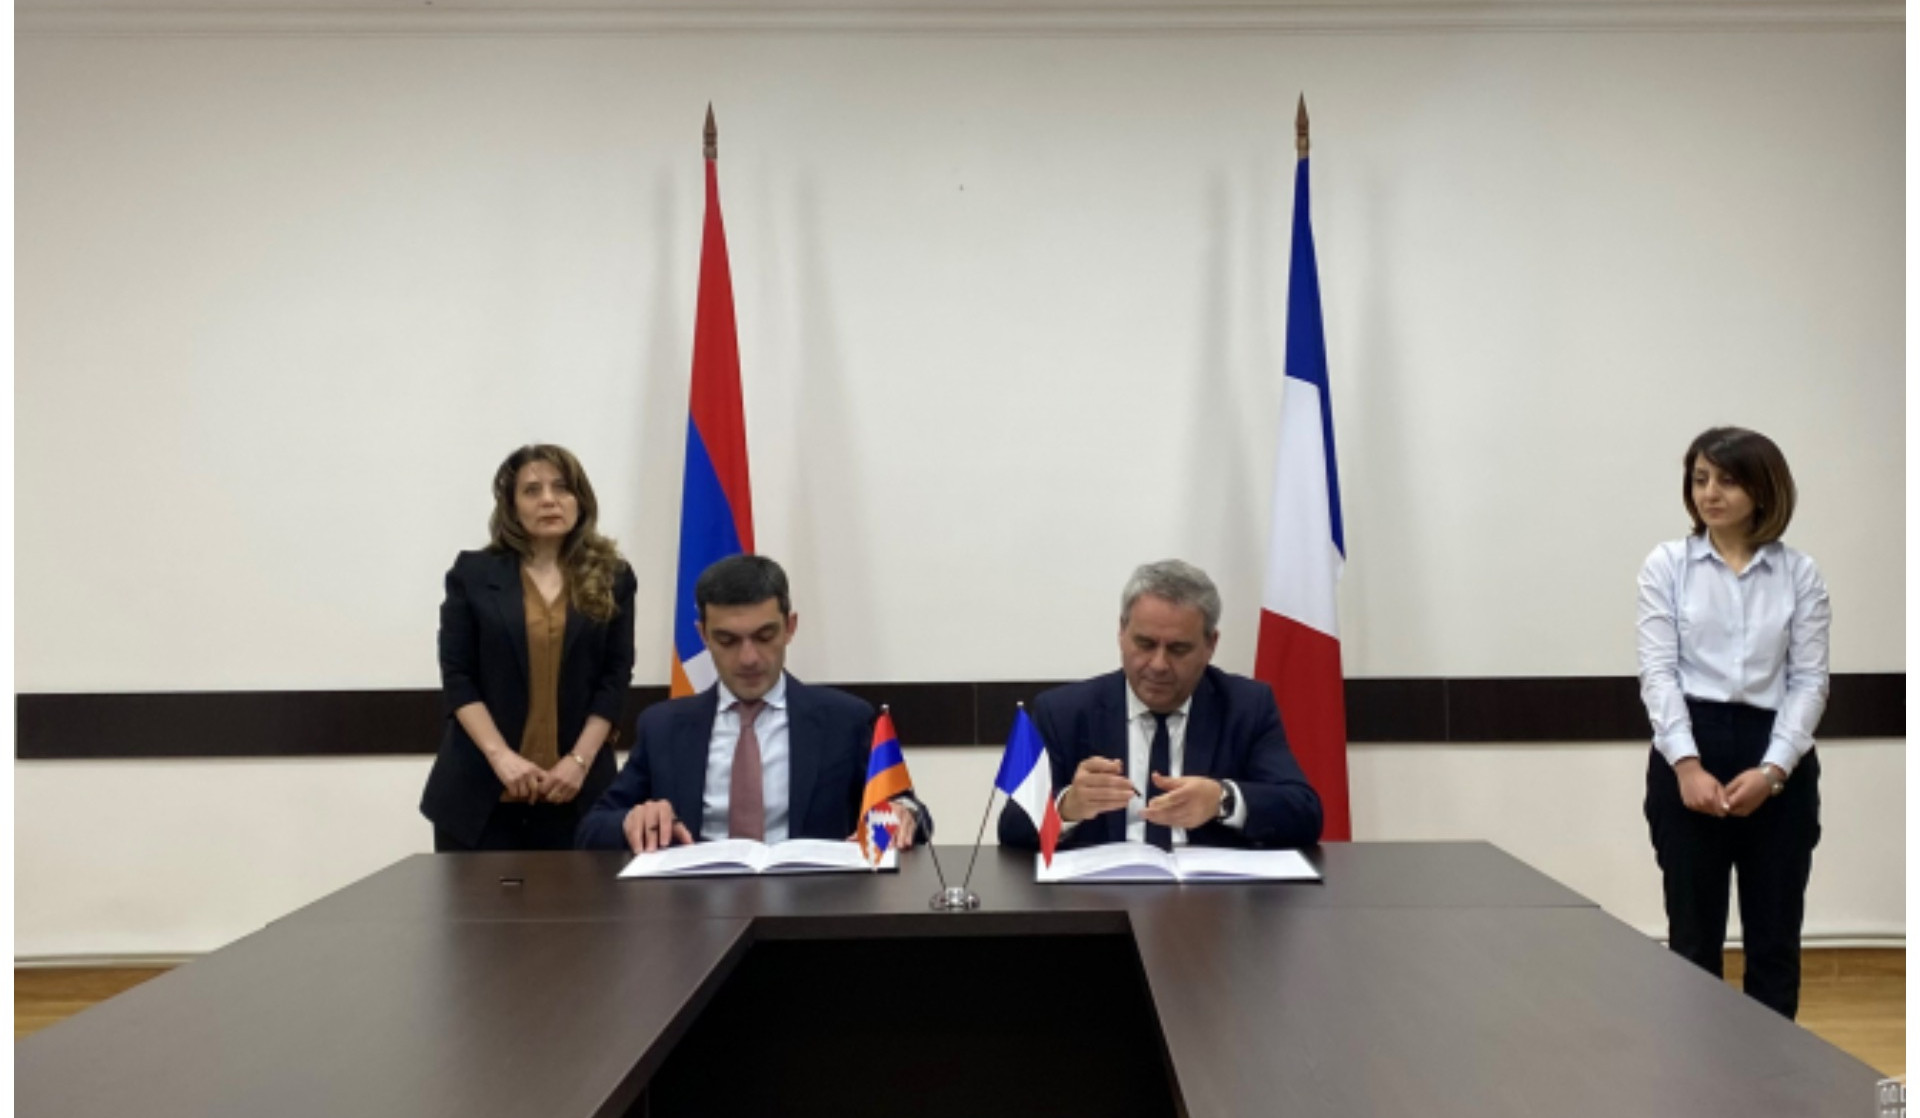 Minister of Foreign Affairs of Artsakh and President of the Regional Council of Hauts-de-France signed joint statement addressed to international community